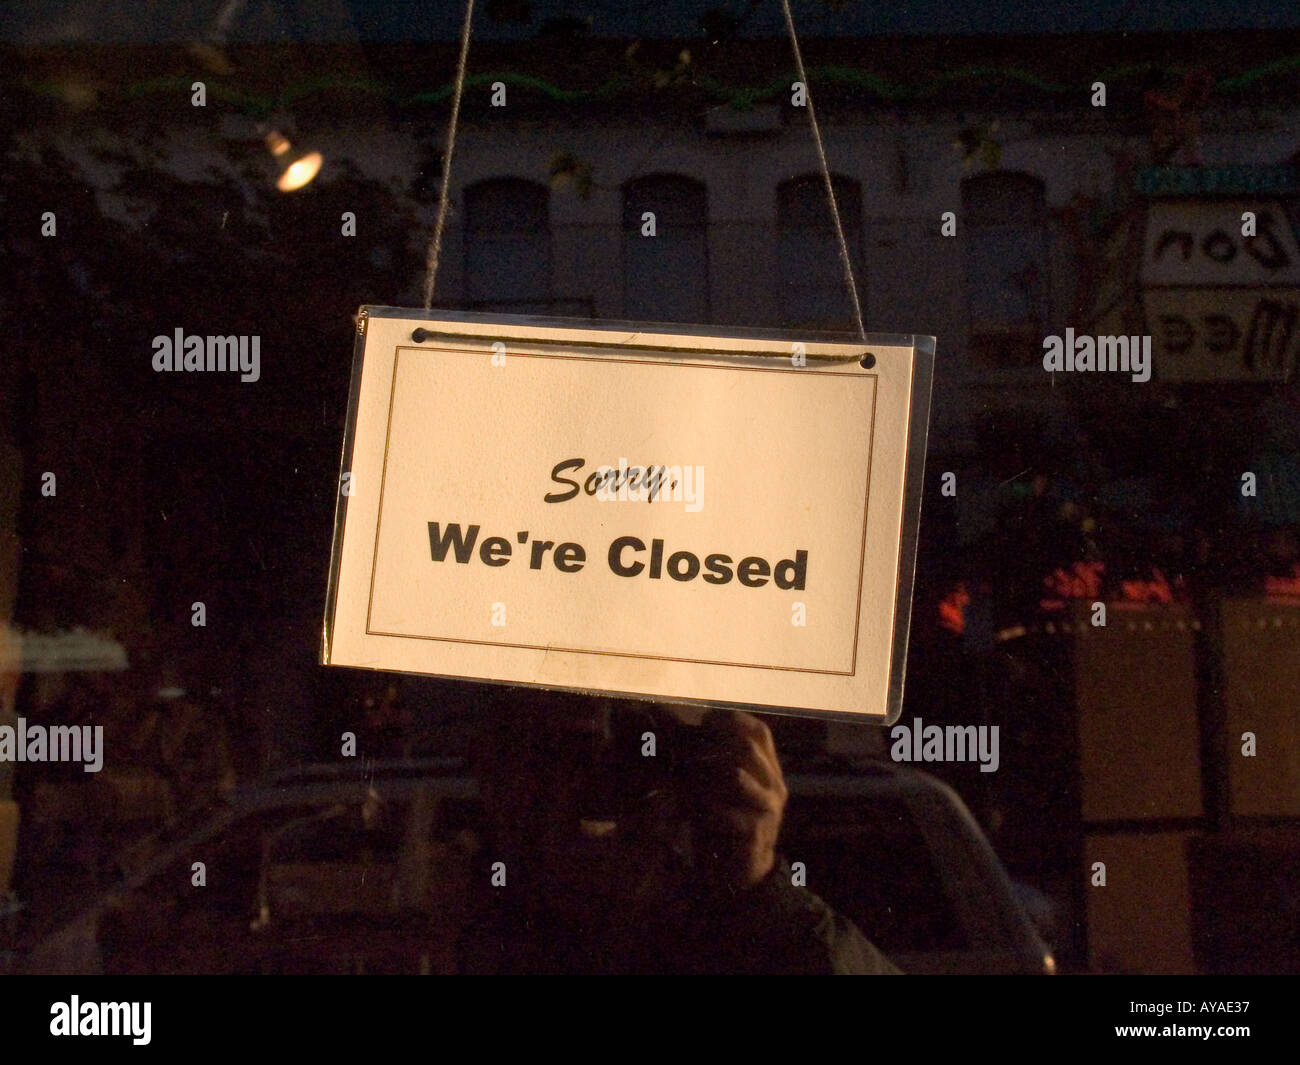 Sorry we are closed sign hanging in shop window Stock Photo